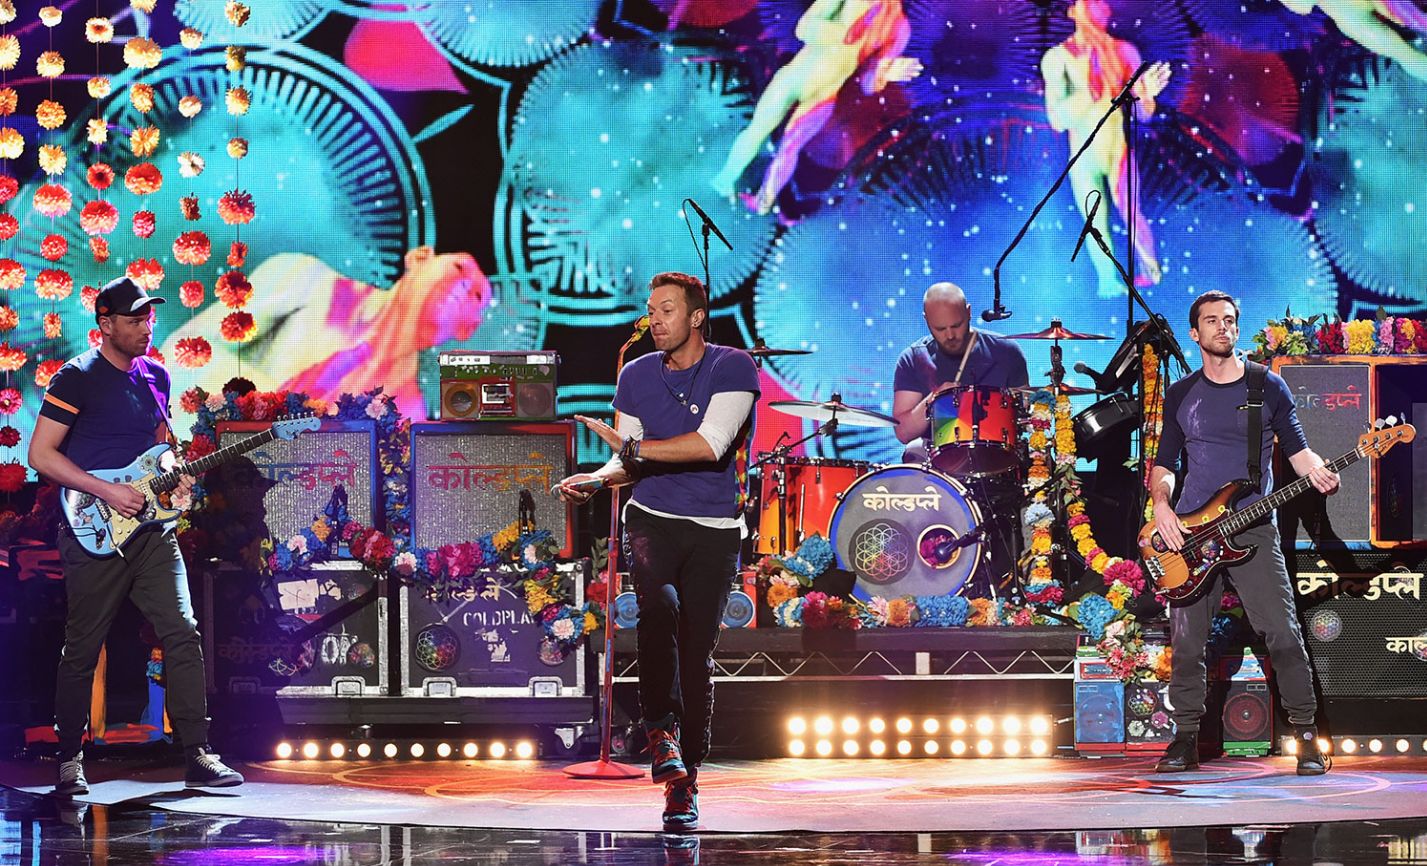 Check out Coldplay's Official Tour dates for summer SpainLodger